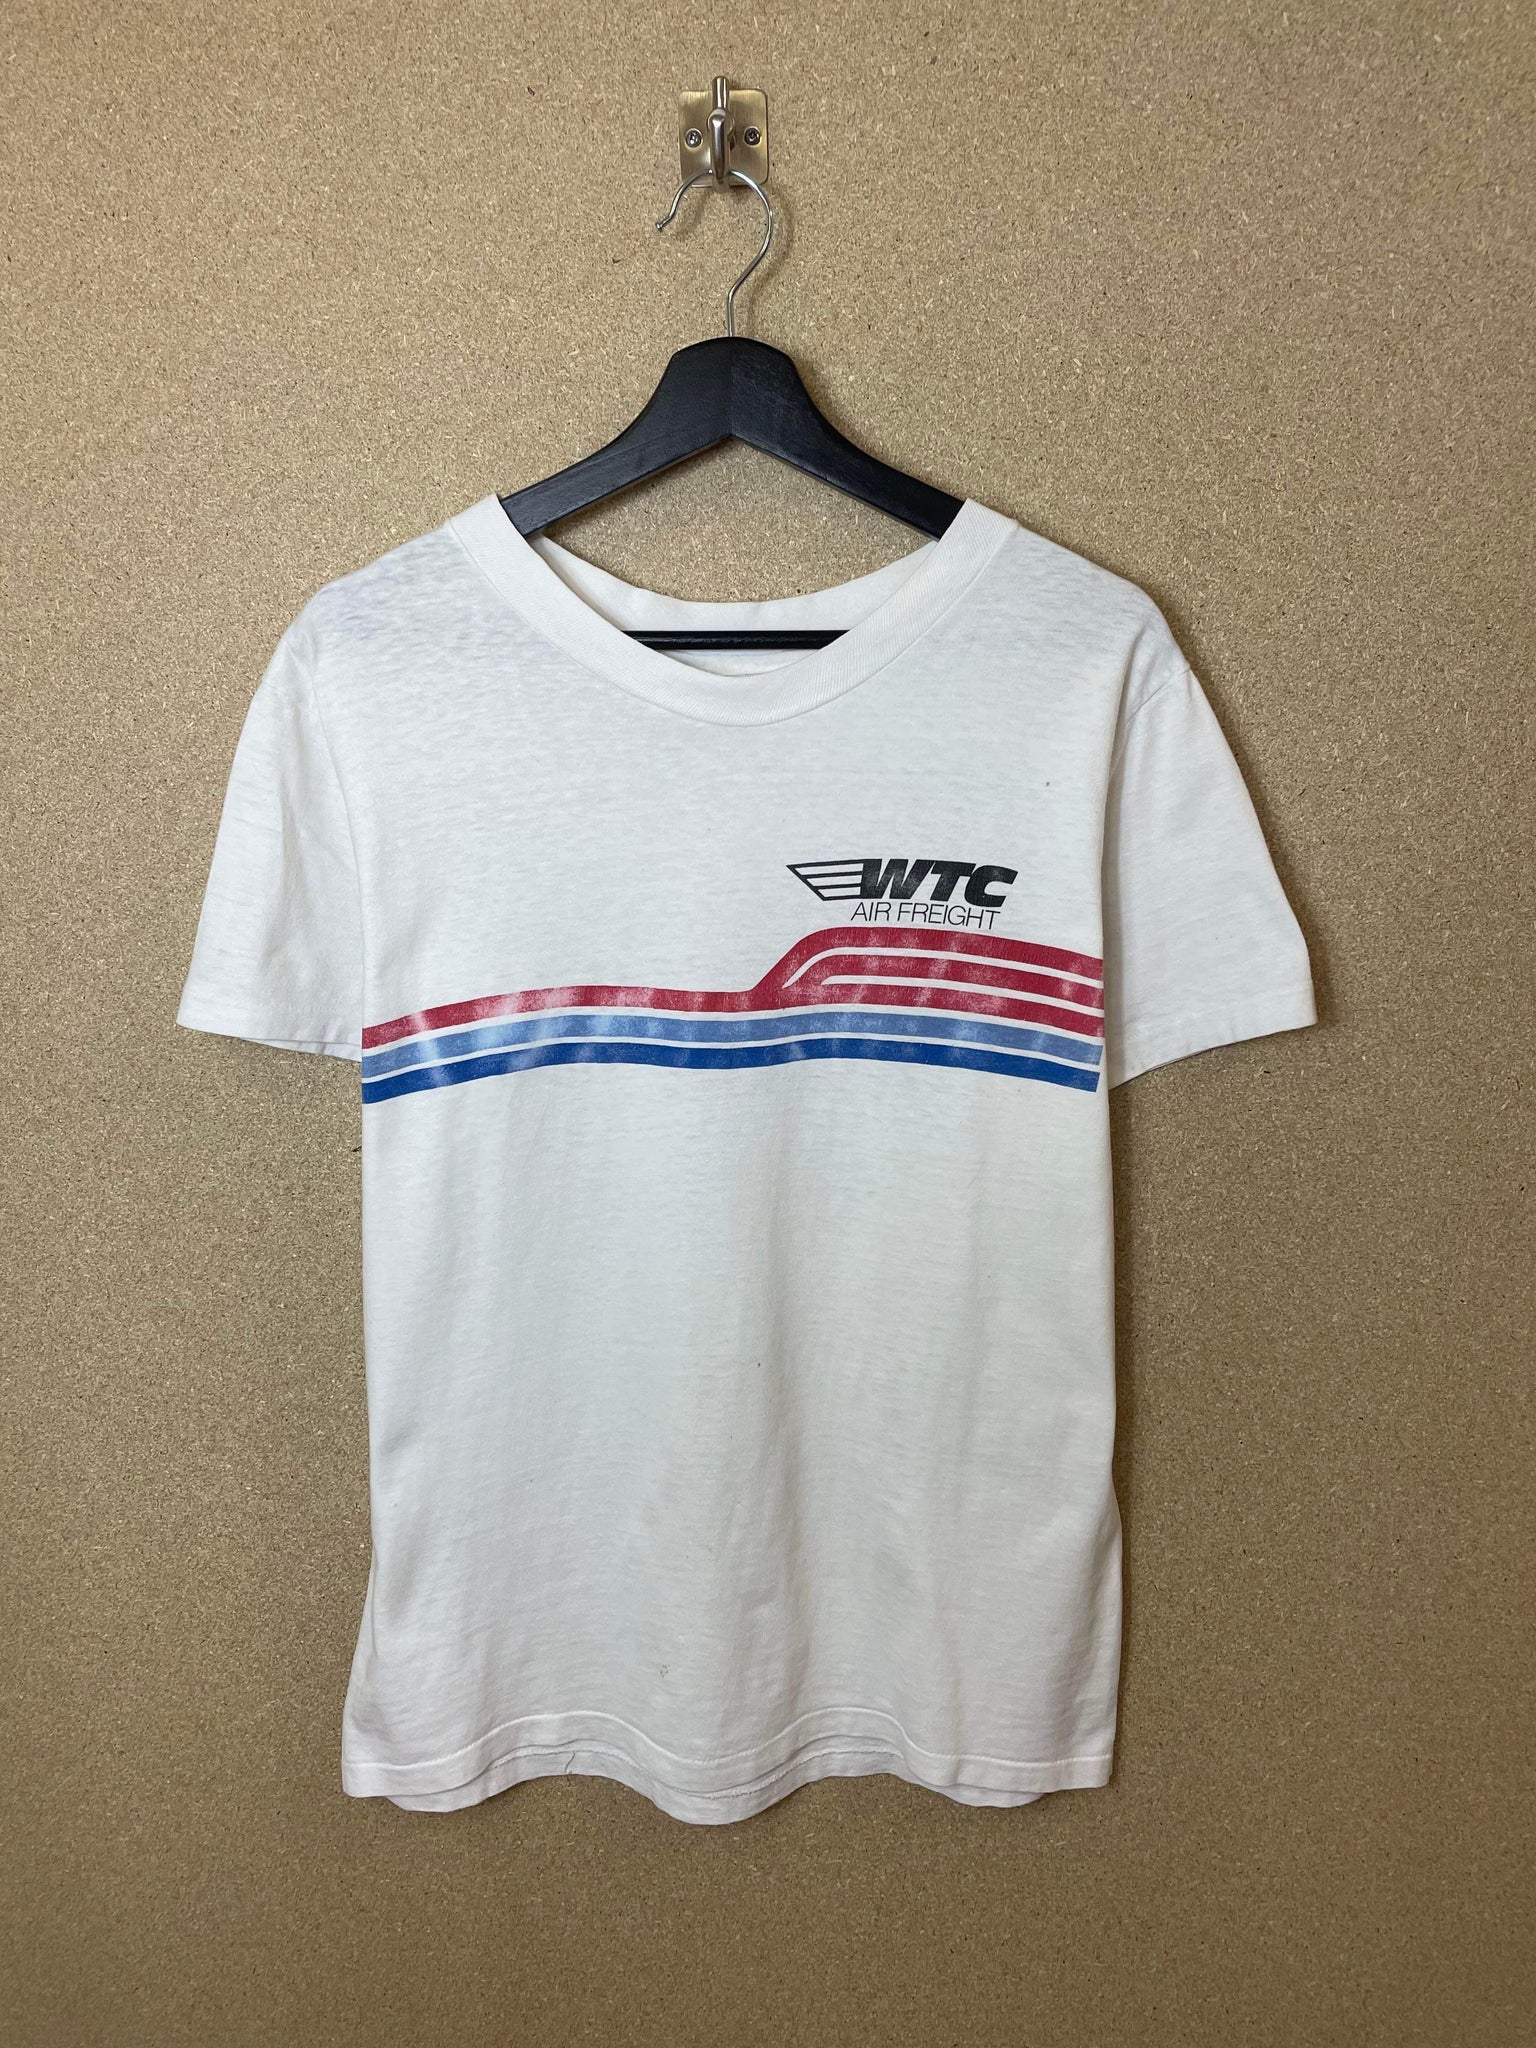 Vintage WTC Air Freight 80s Tee - M